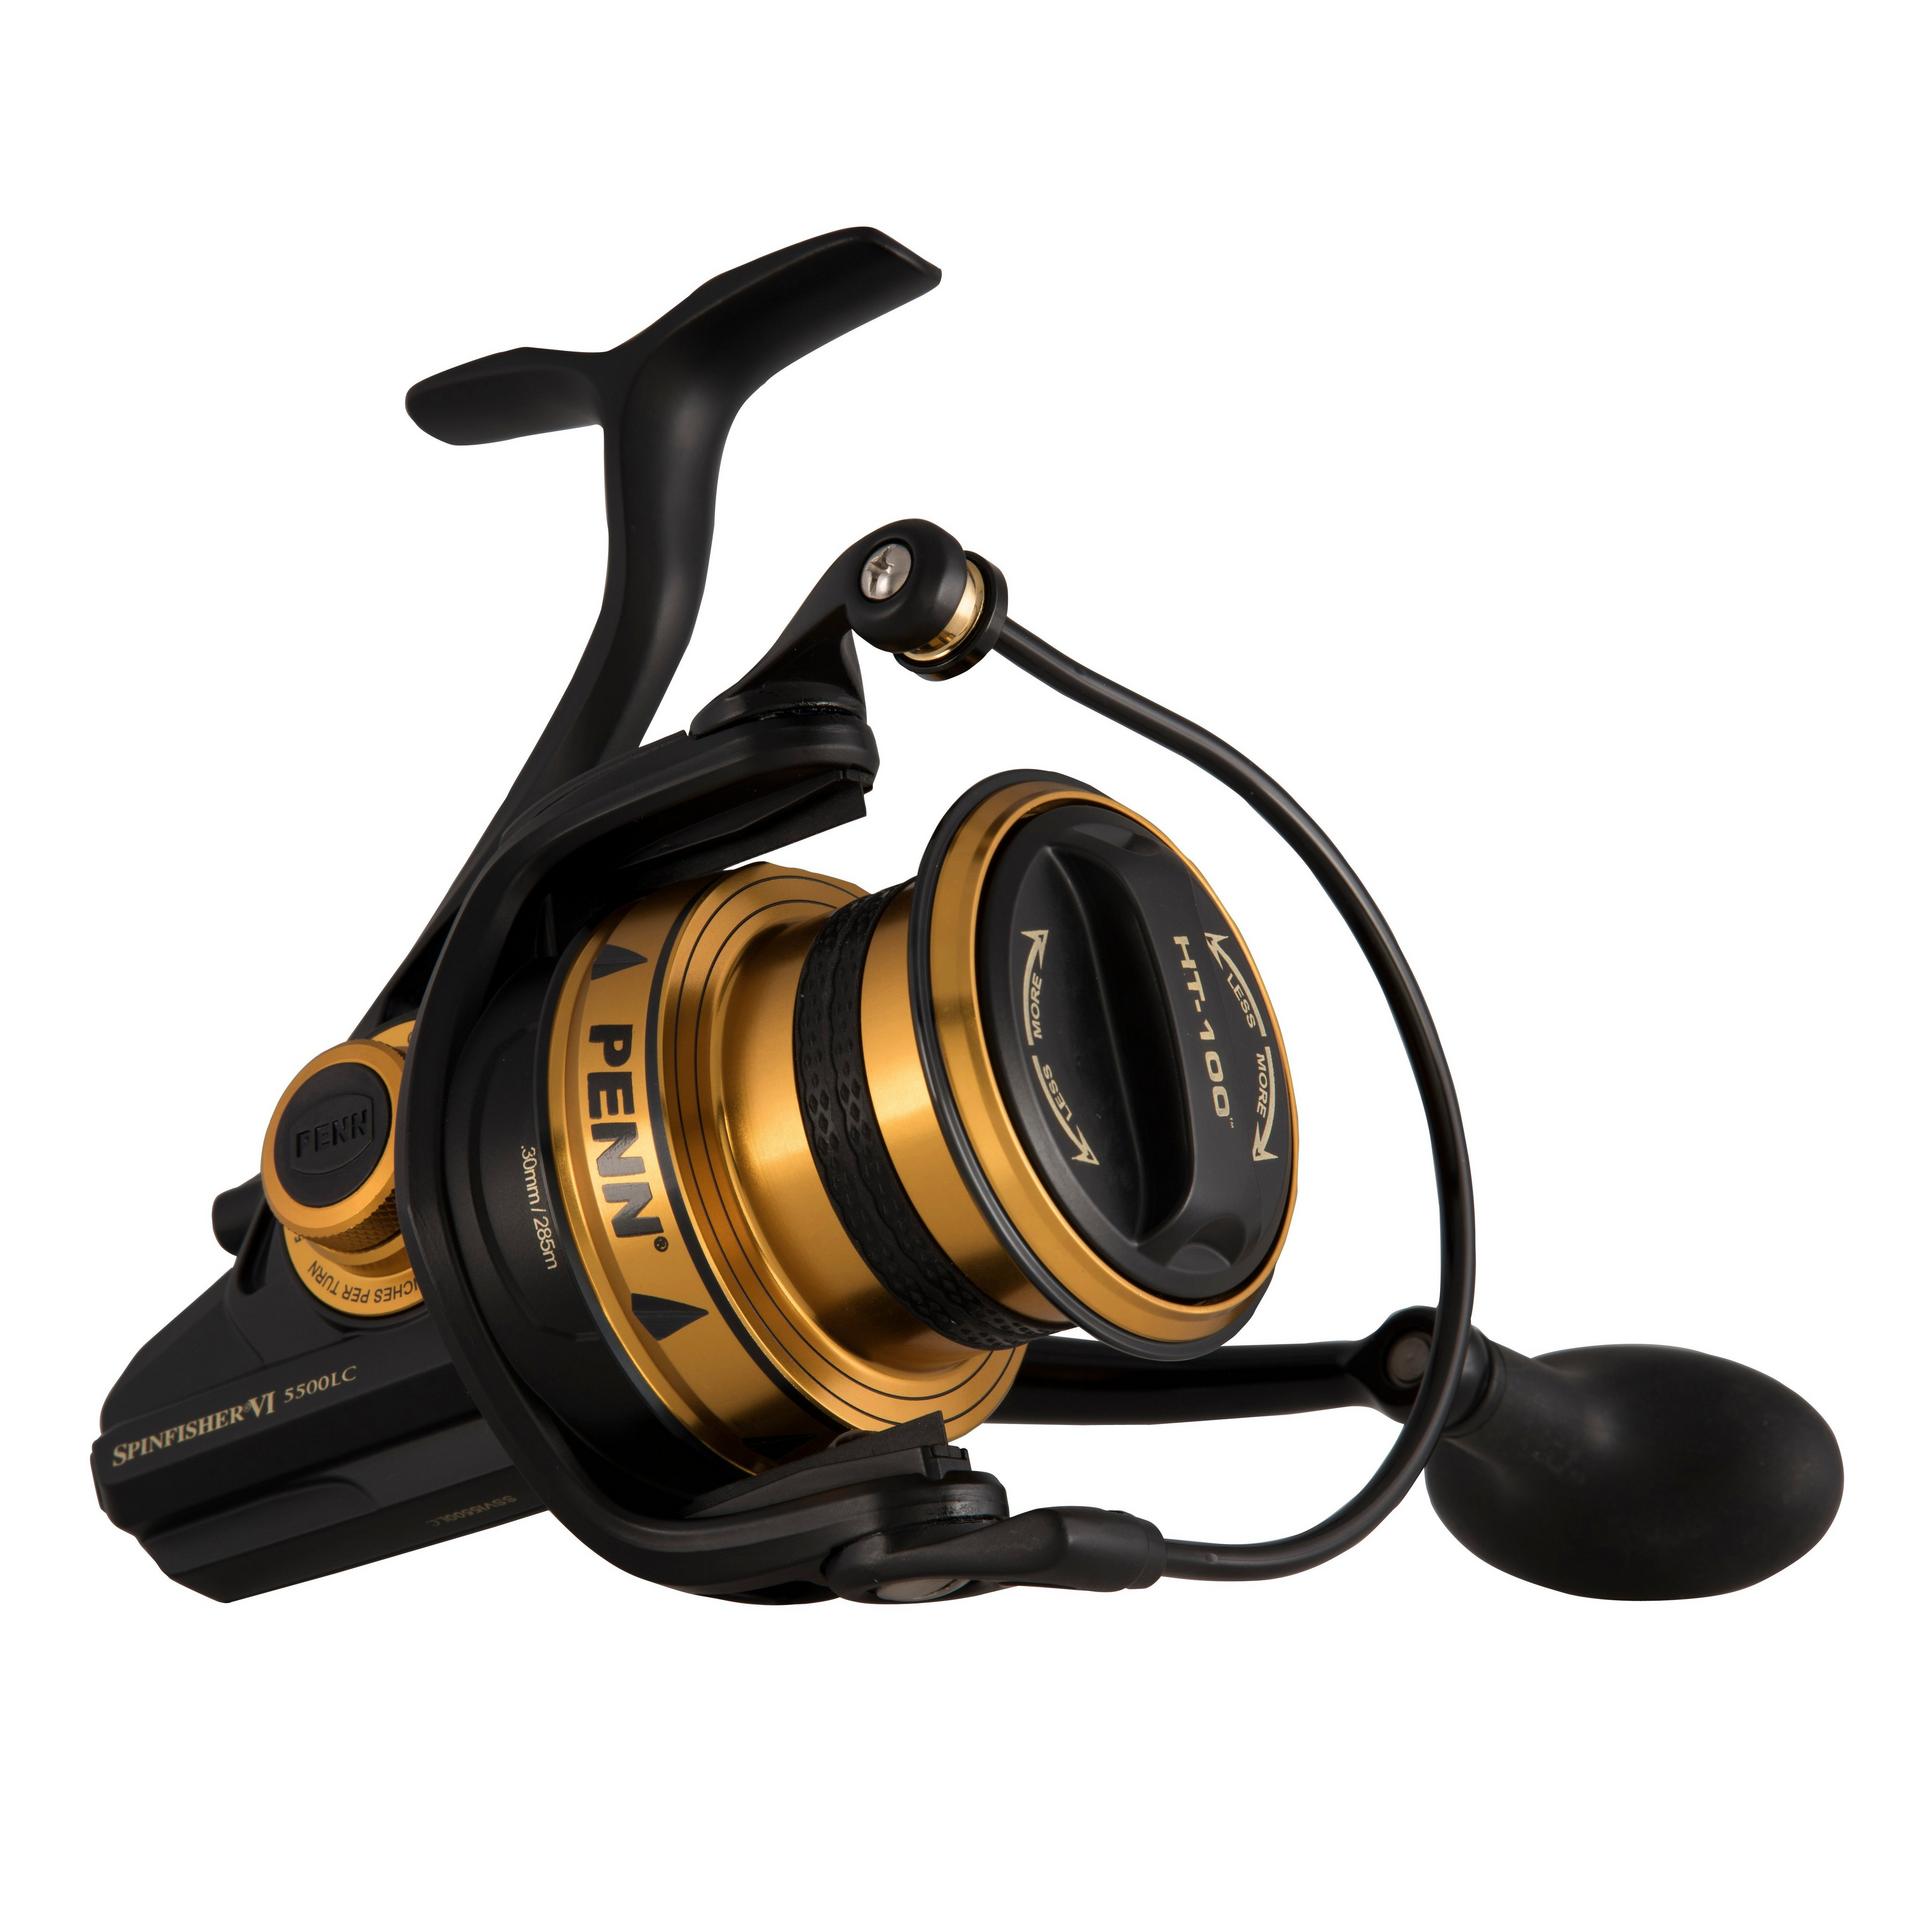 PENN Rival Longcast Fishing Reel - Lightweight Long Distance Casting Reel  for Sea, Saltwater, Surf, Rock and Beach Fishing: Buy Online at Best Price  in Egypt - Souq is now